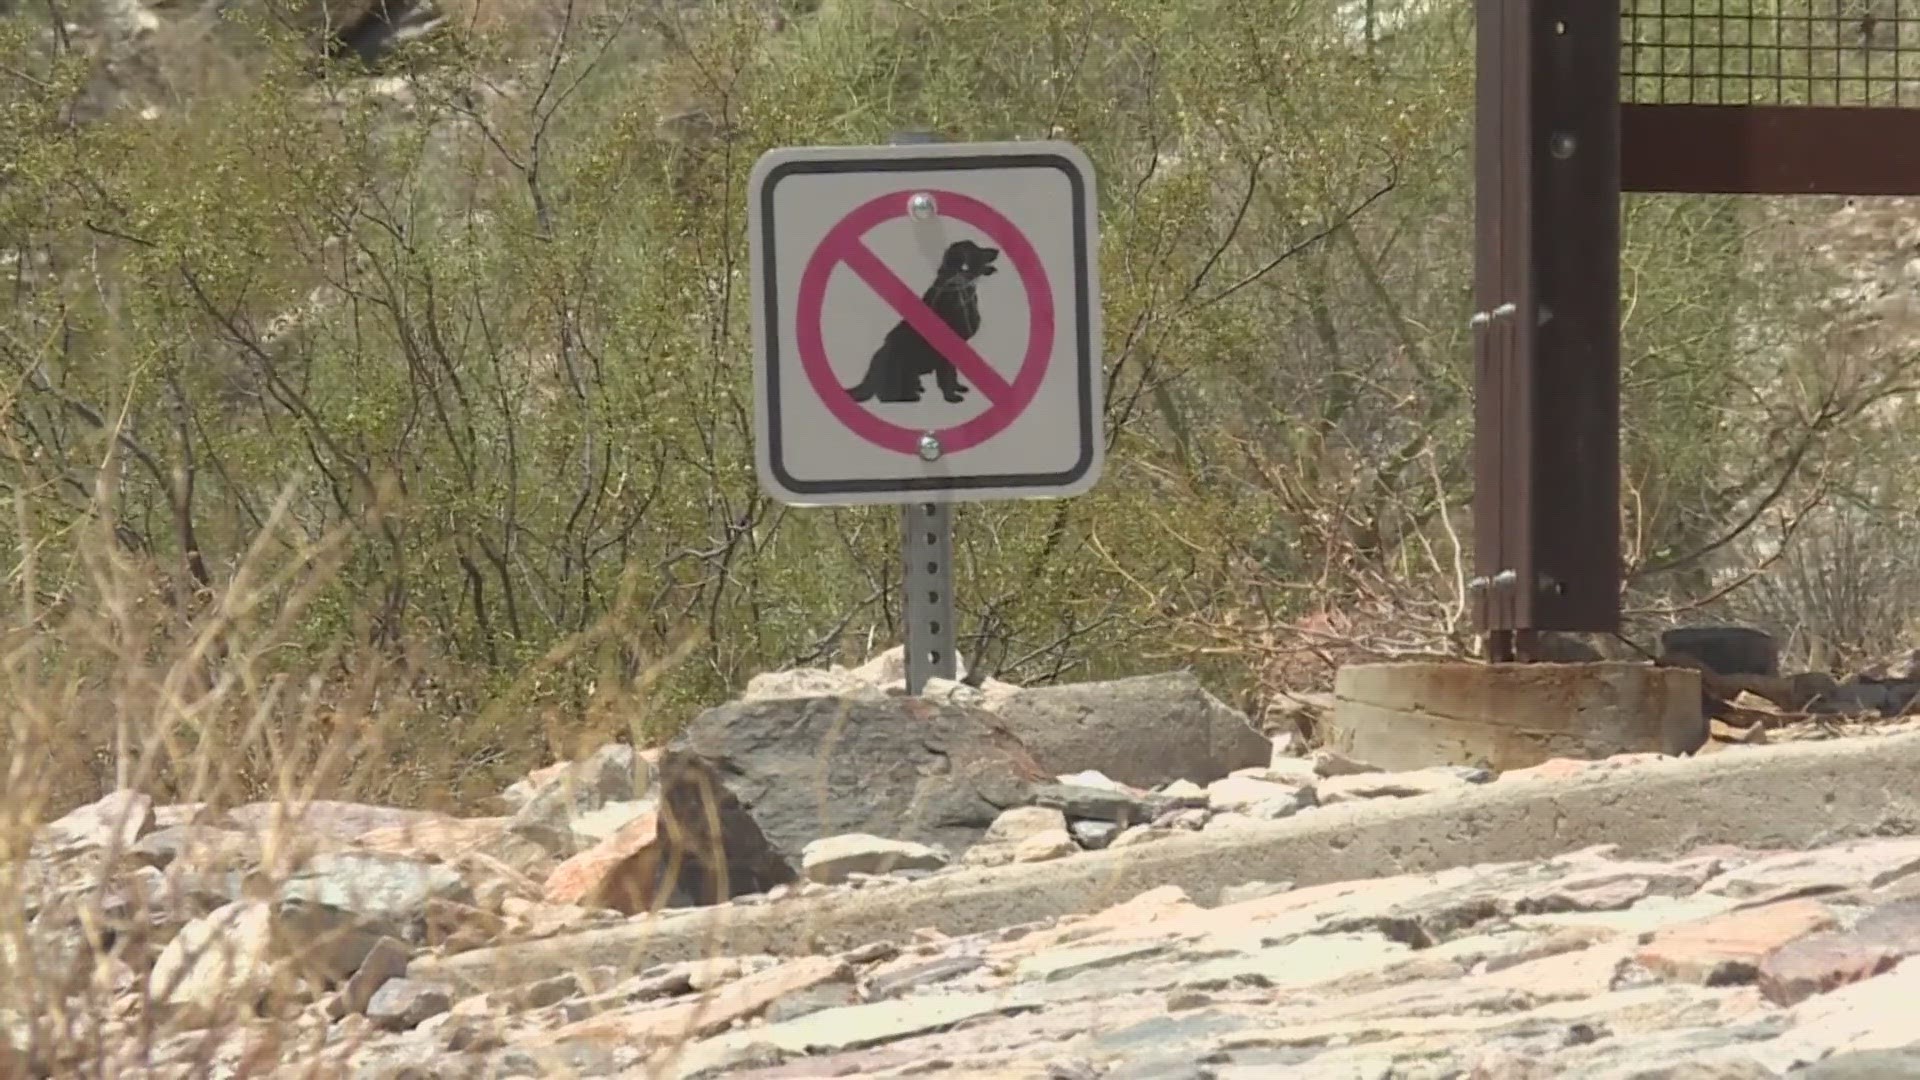 A man with two dogs was rescued from Piestewa Peak Wednesday after suffering a heat-related emergency. One of the dogs did not survive, officials said.